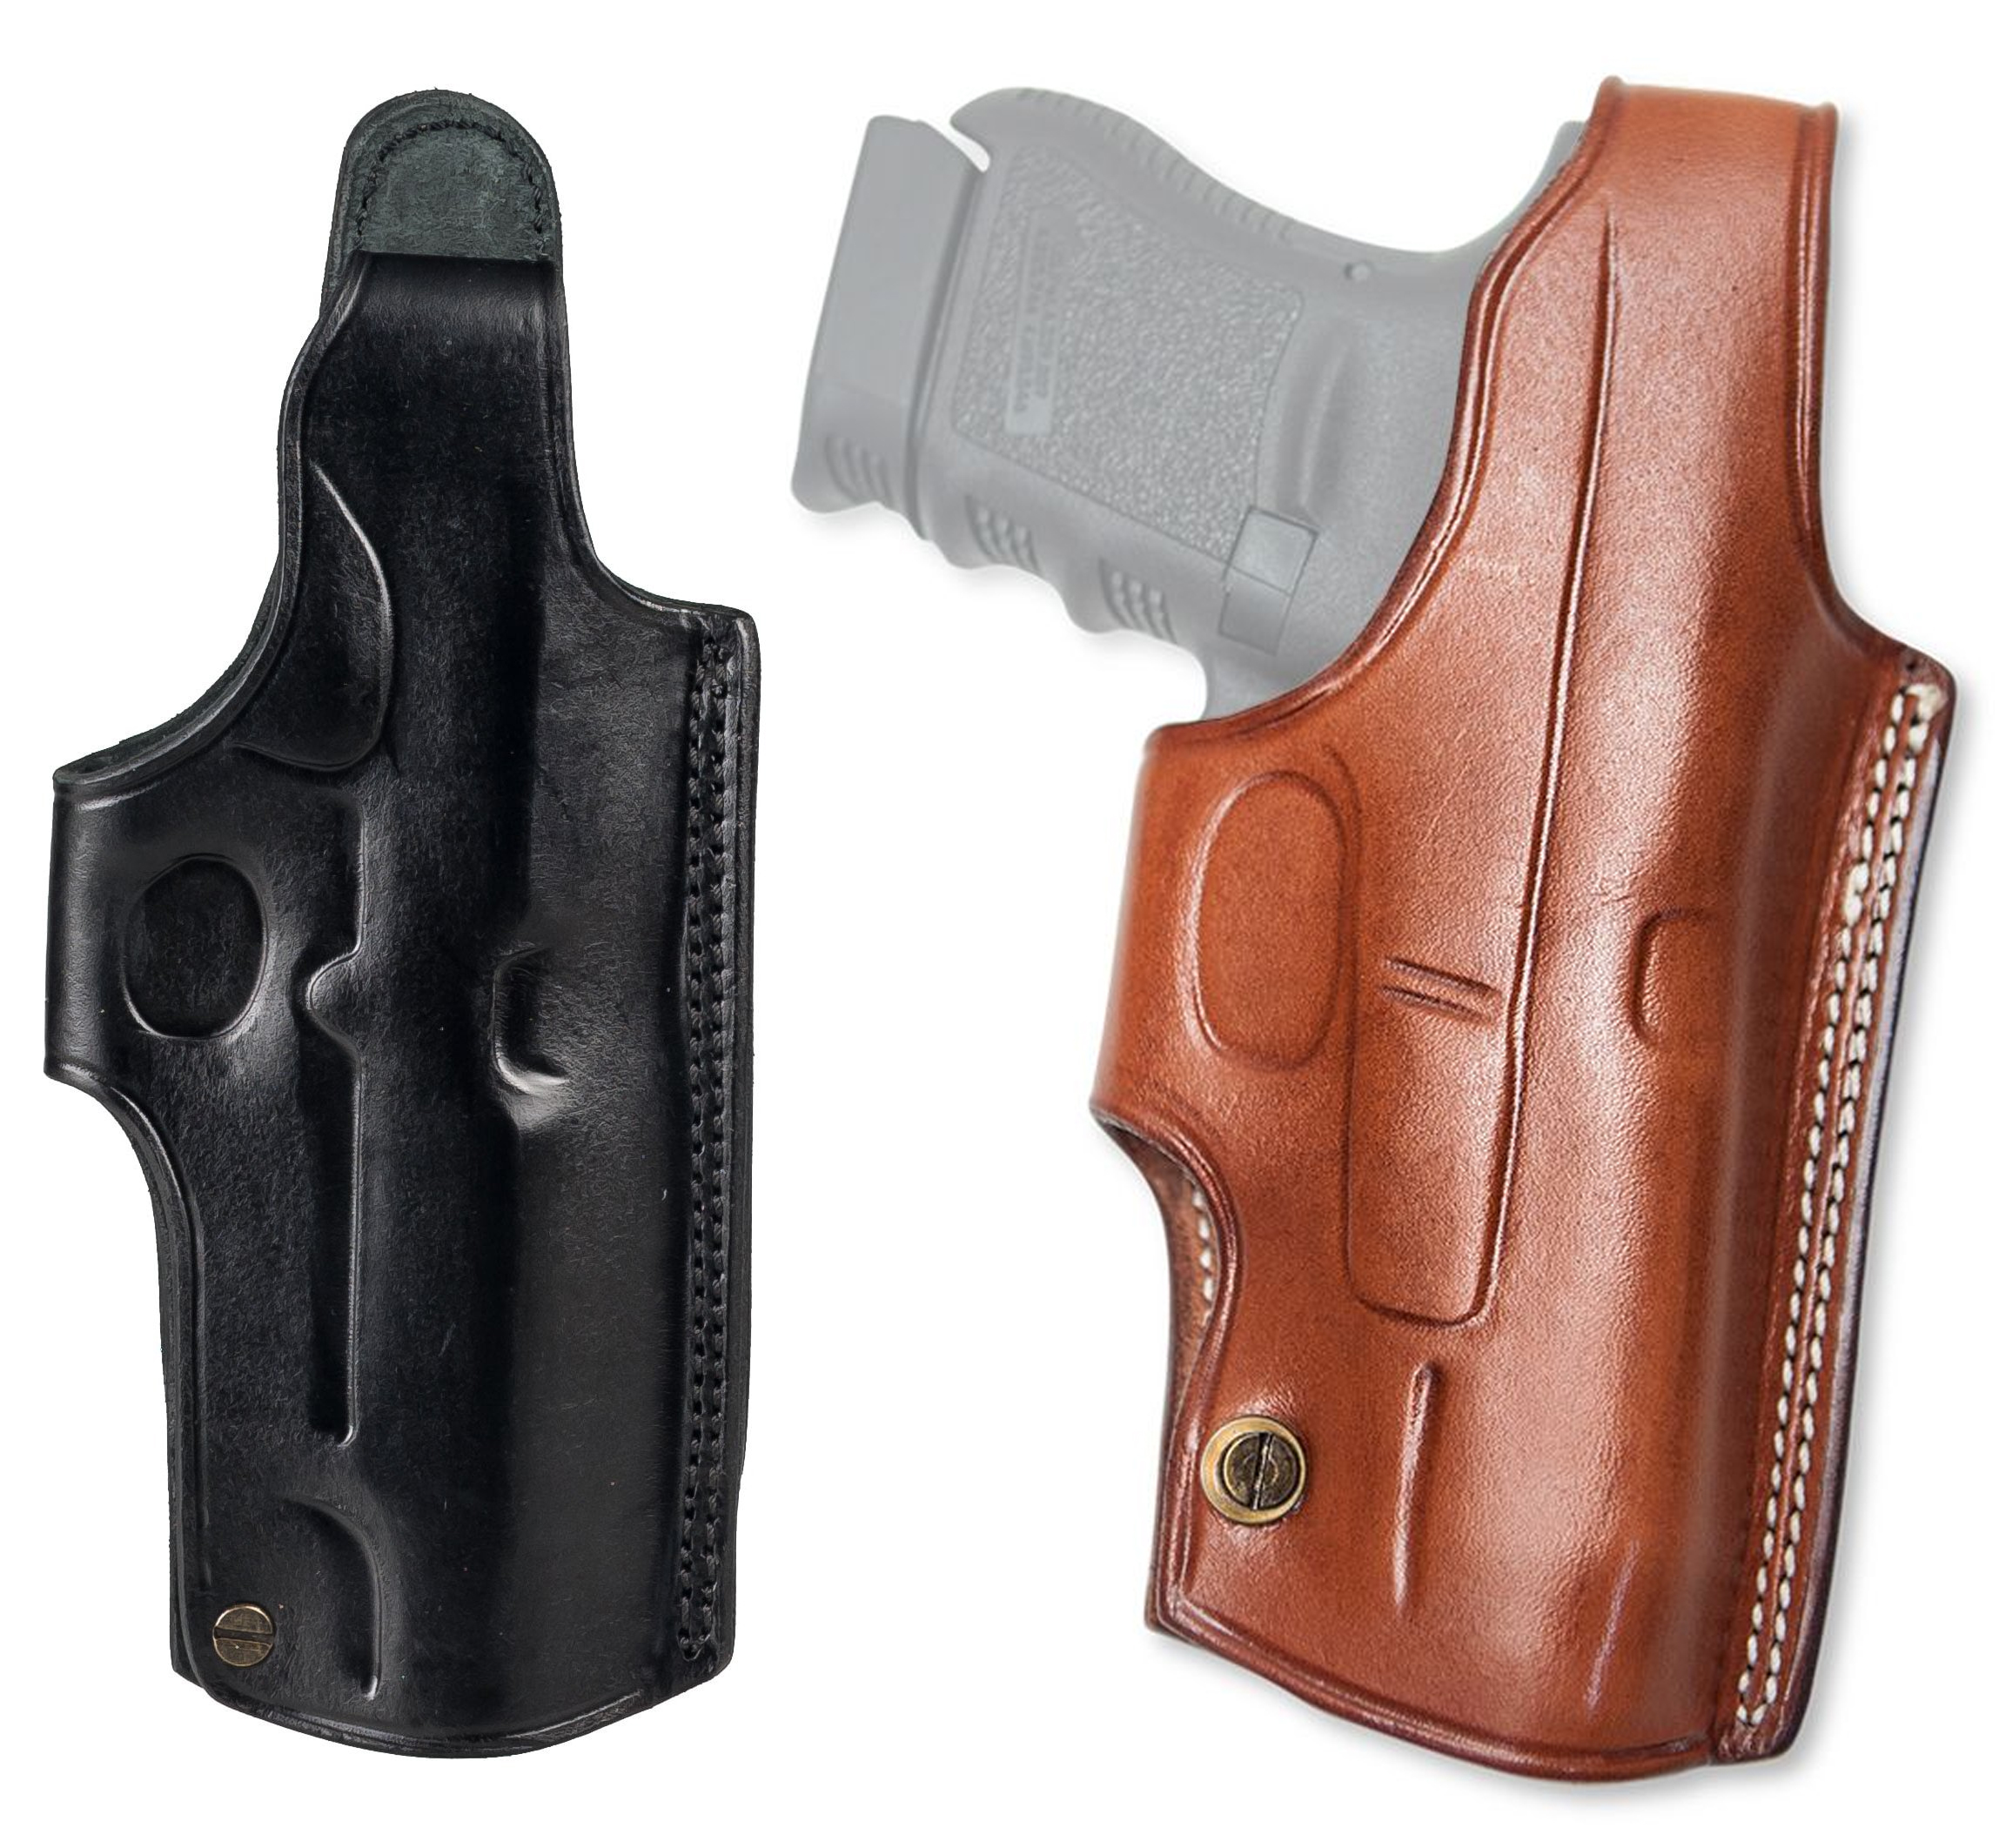 Cebeci Arms IWB LH Reinforced Holster 1911 & Clones 4.5”